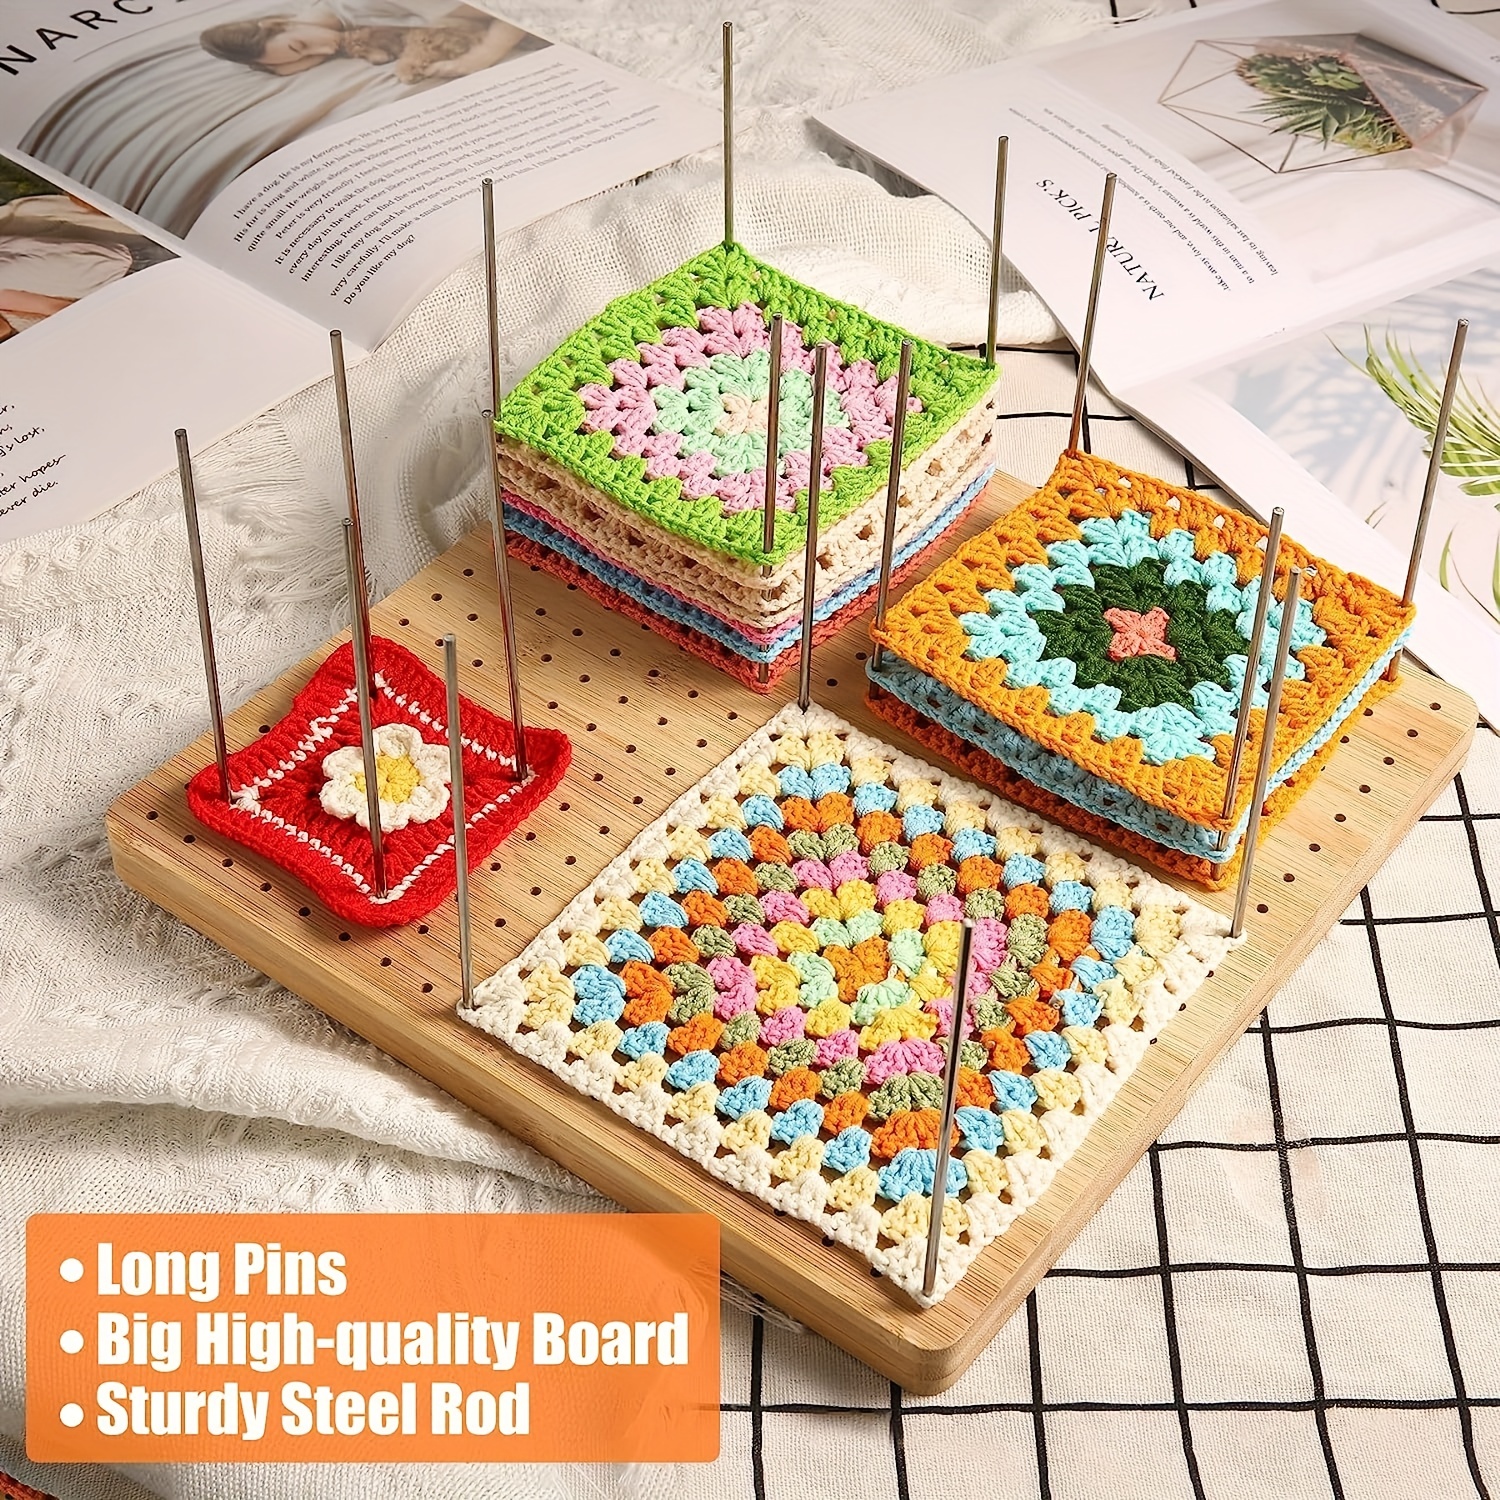  FlidRunest 9.25 Inches Wooden Blocking Board for Crocheting,  Crochet Blocking Board Handcrafted Knitting Board for Knitting Crochet,  Blocking Board Full Kit with 25 Steel Pins,Stand Included